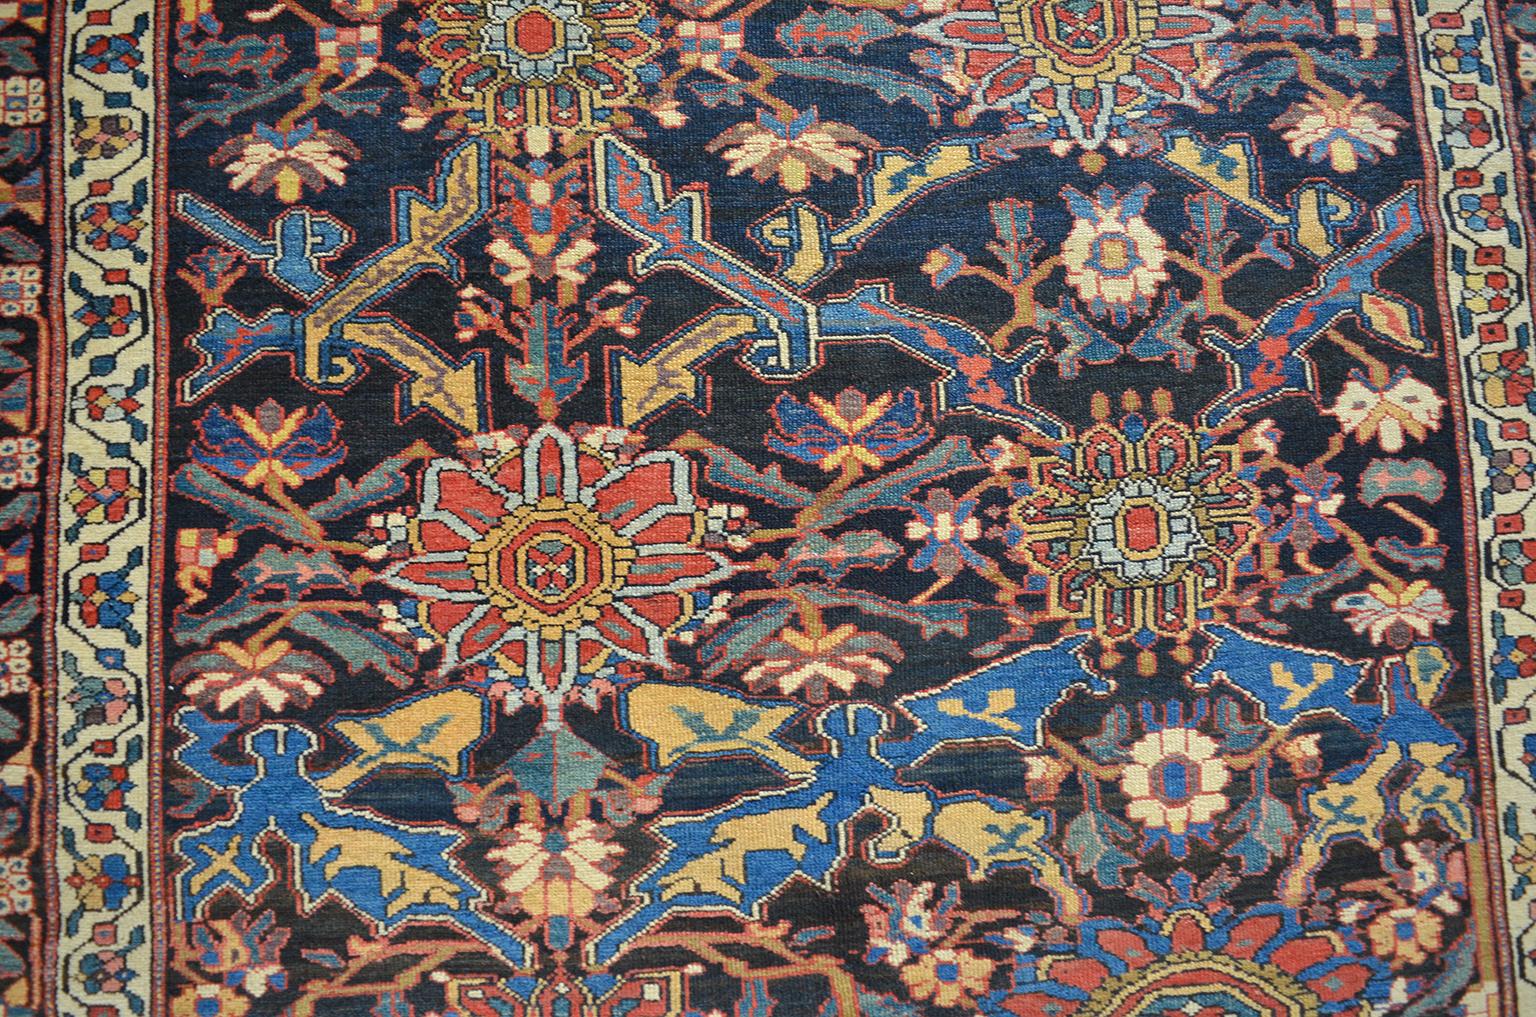 This antique Persian Bakhtiari carpet in pure handspun wool circa 1880 utilizes a hand knotted Bakhtiari weave and organic vegetable dyes. Originating from the village of Chaal-e Shotor, this carpet is characterized by its overall geometric design